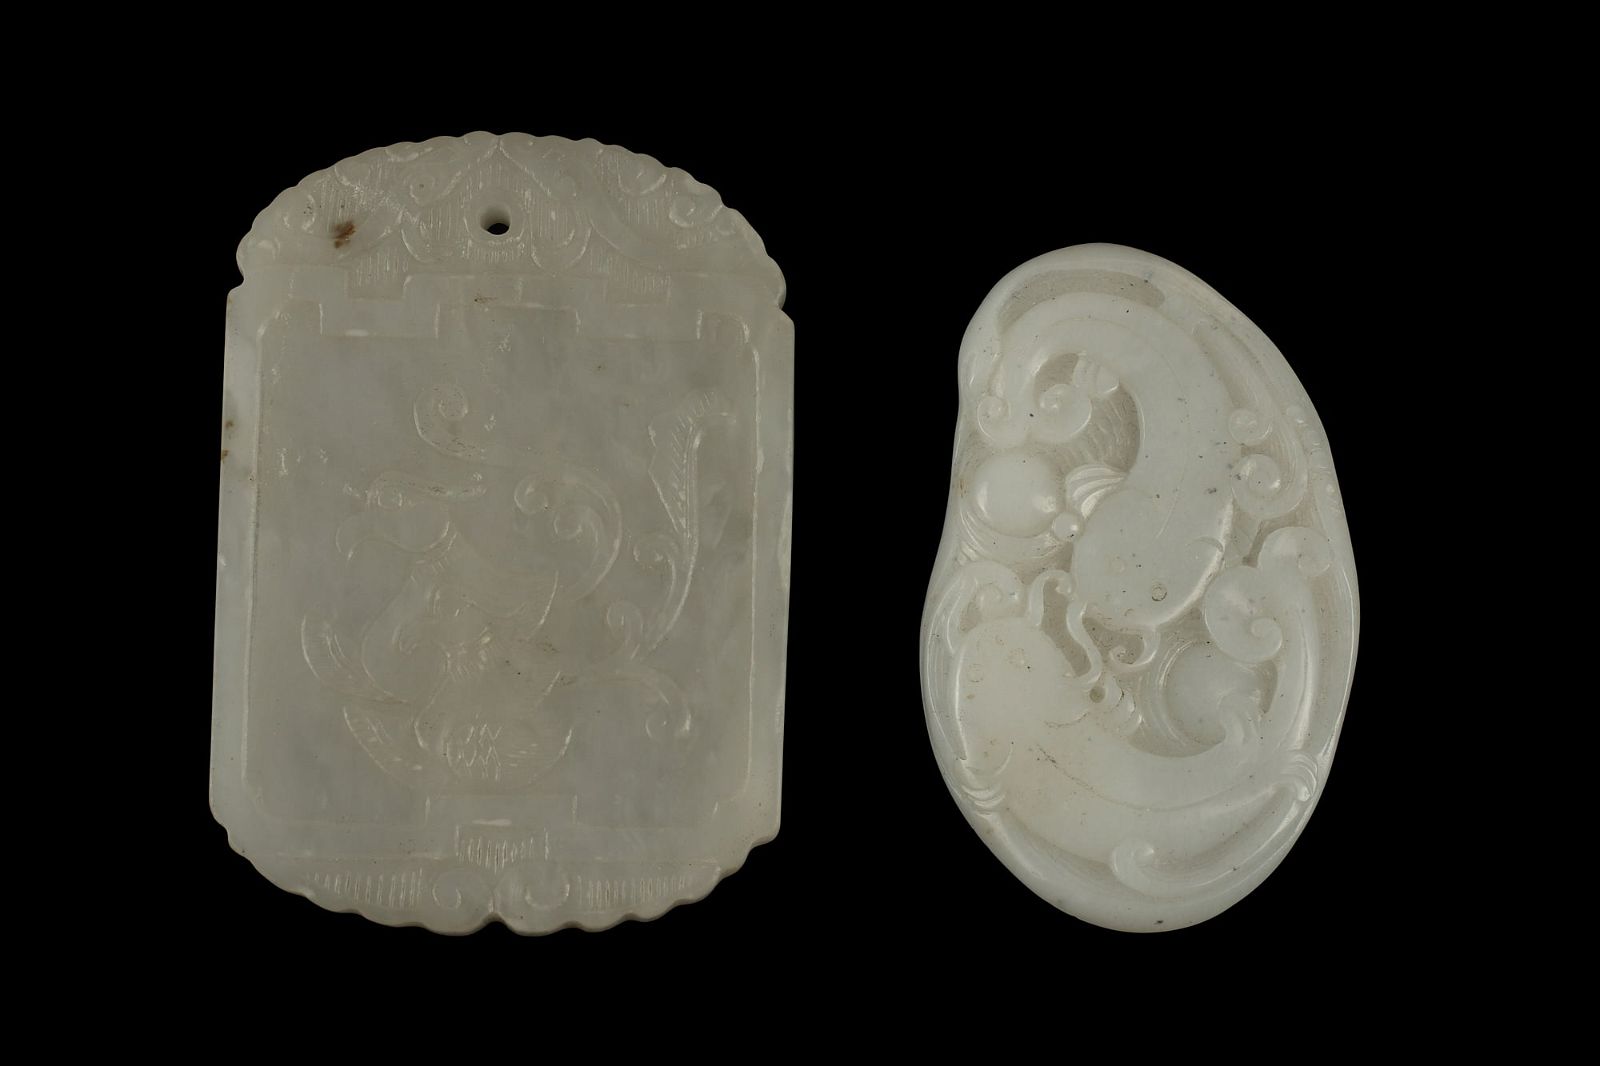 TWO CHINESE WHITE JADE CARVED PLAQUESTwo 2fb3dea